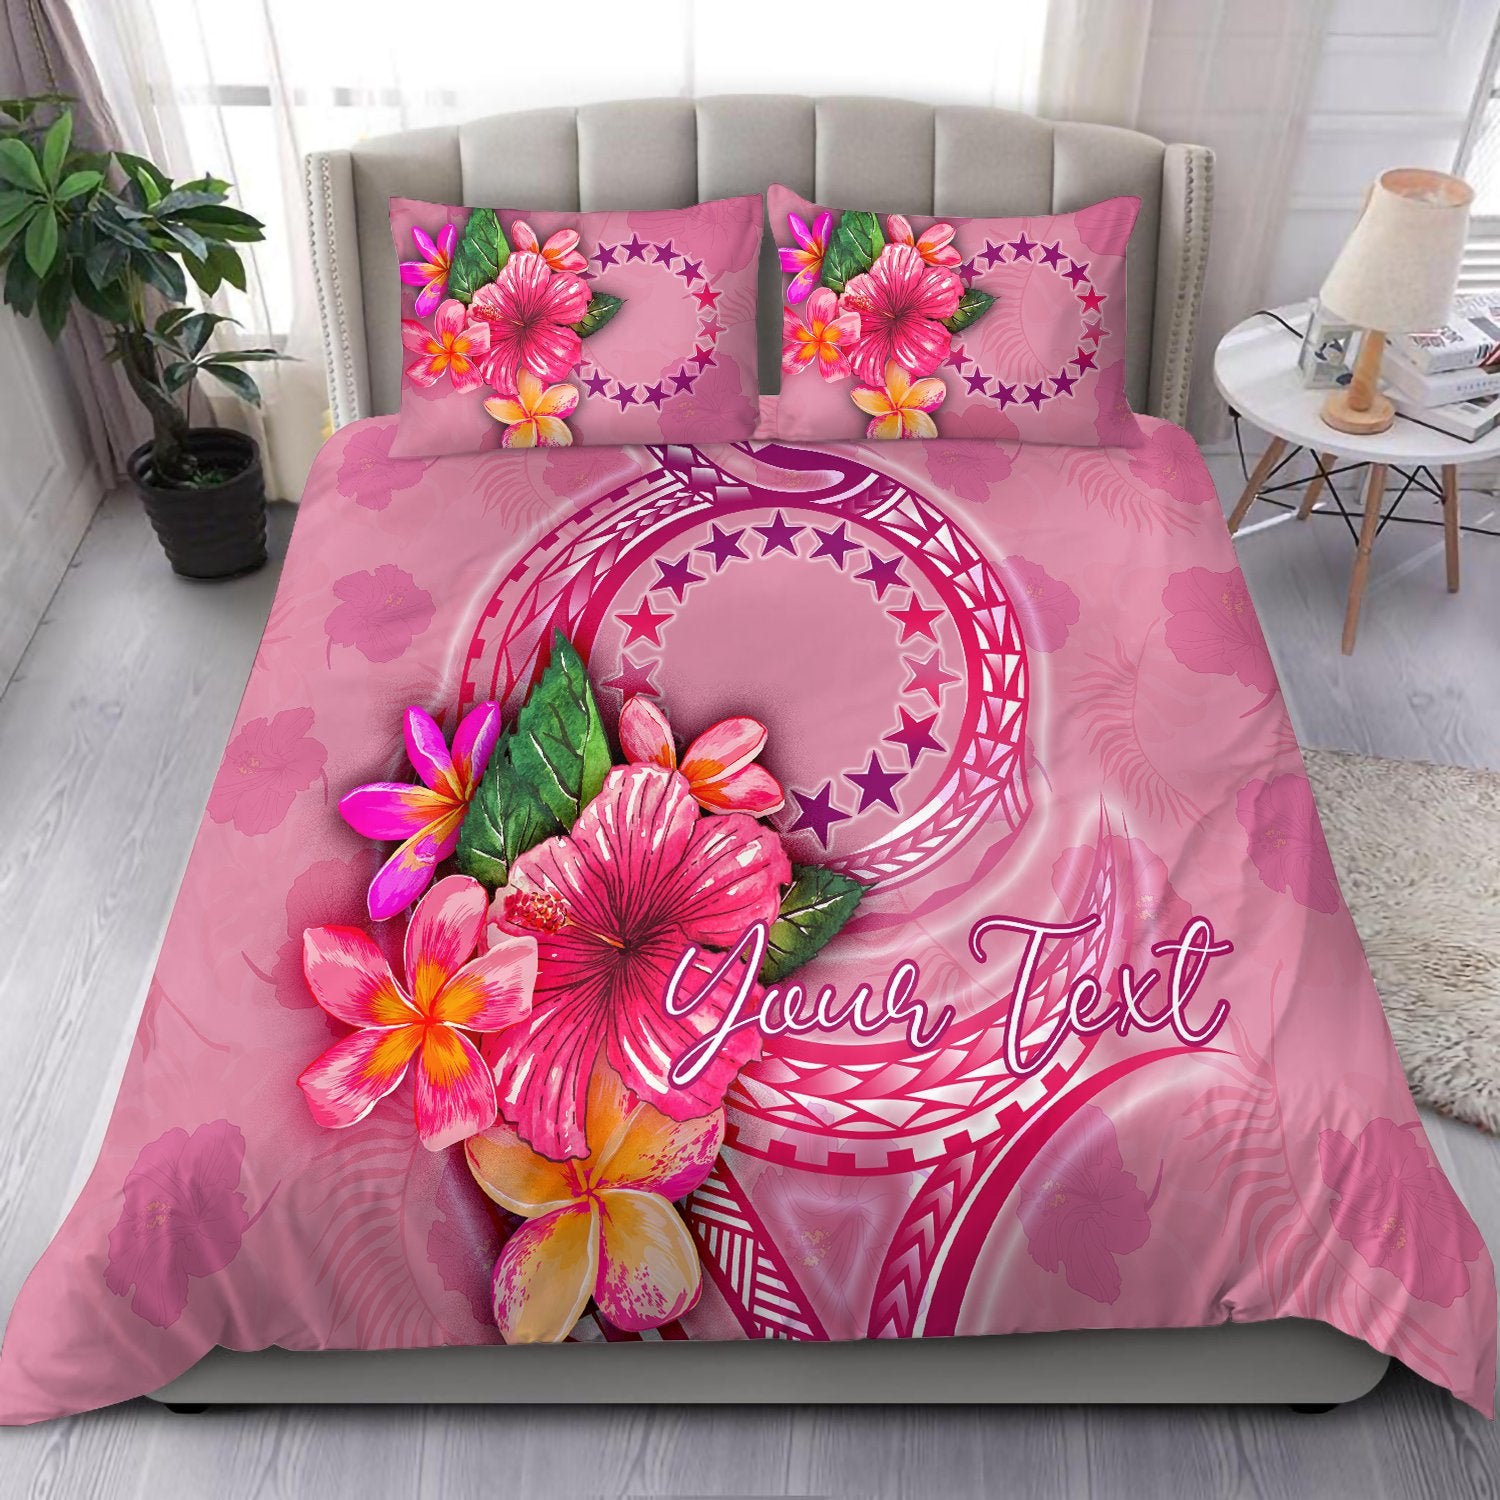 Cook Islands Polynesian Custom Personalised Bedding Set - Floral With Seal Pink Pink - Polynesian Pride